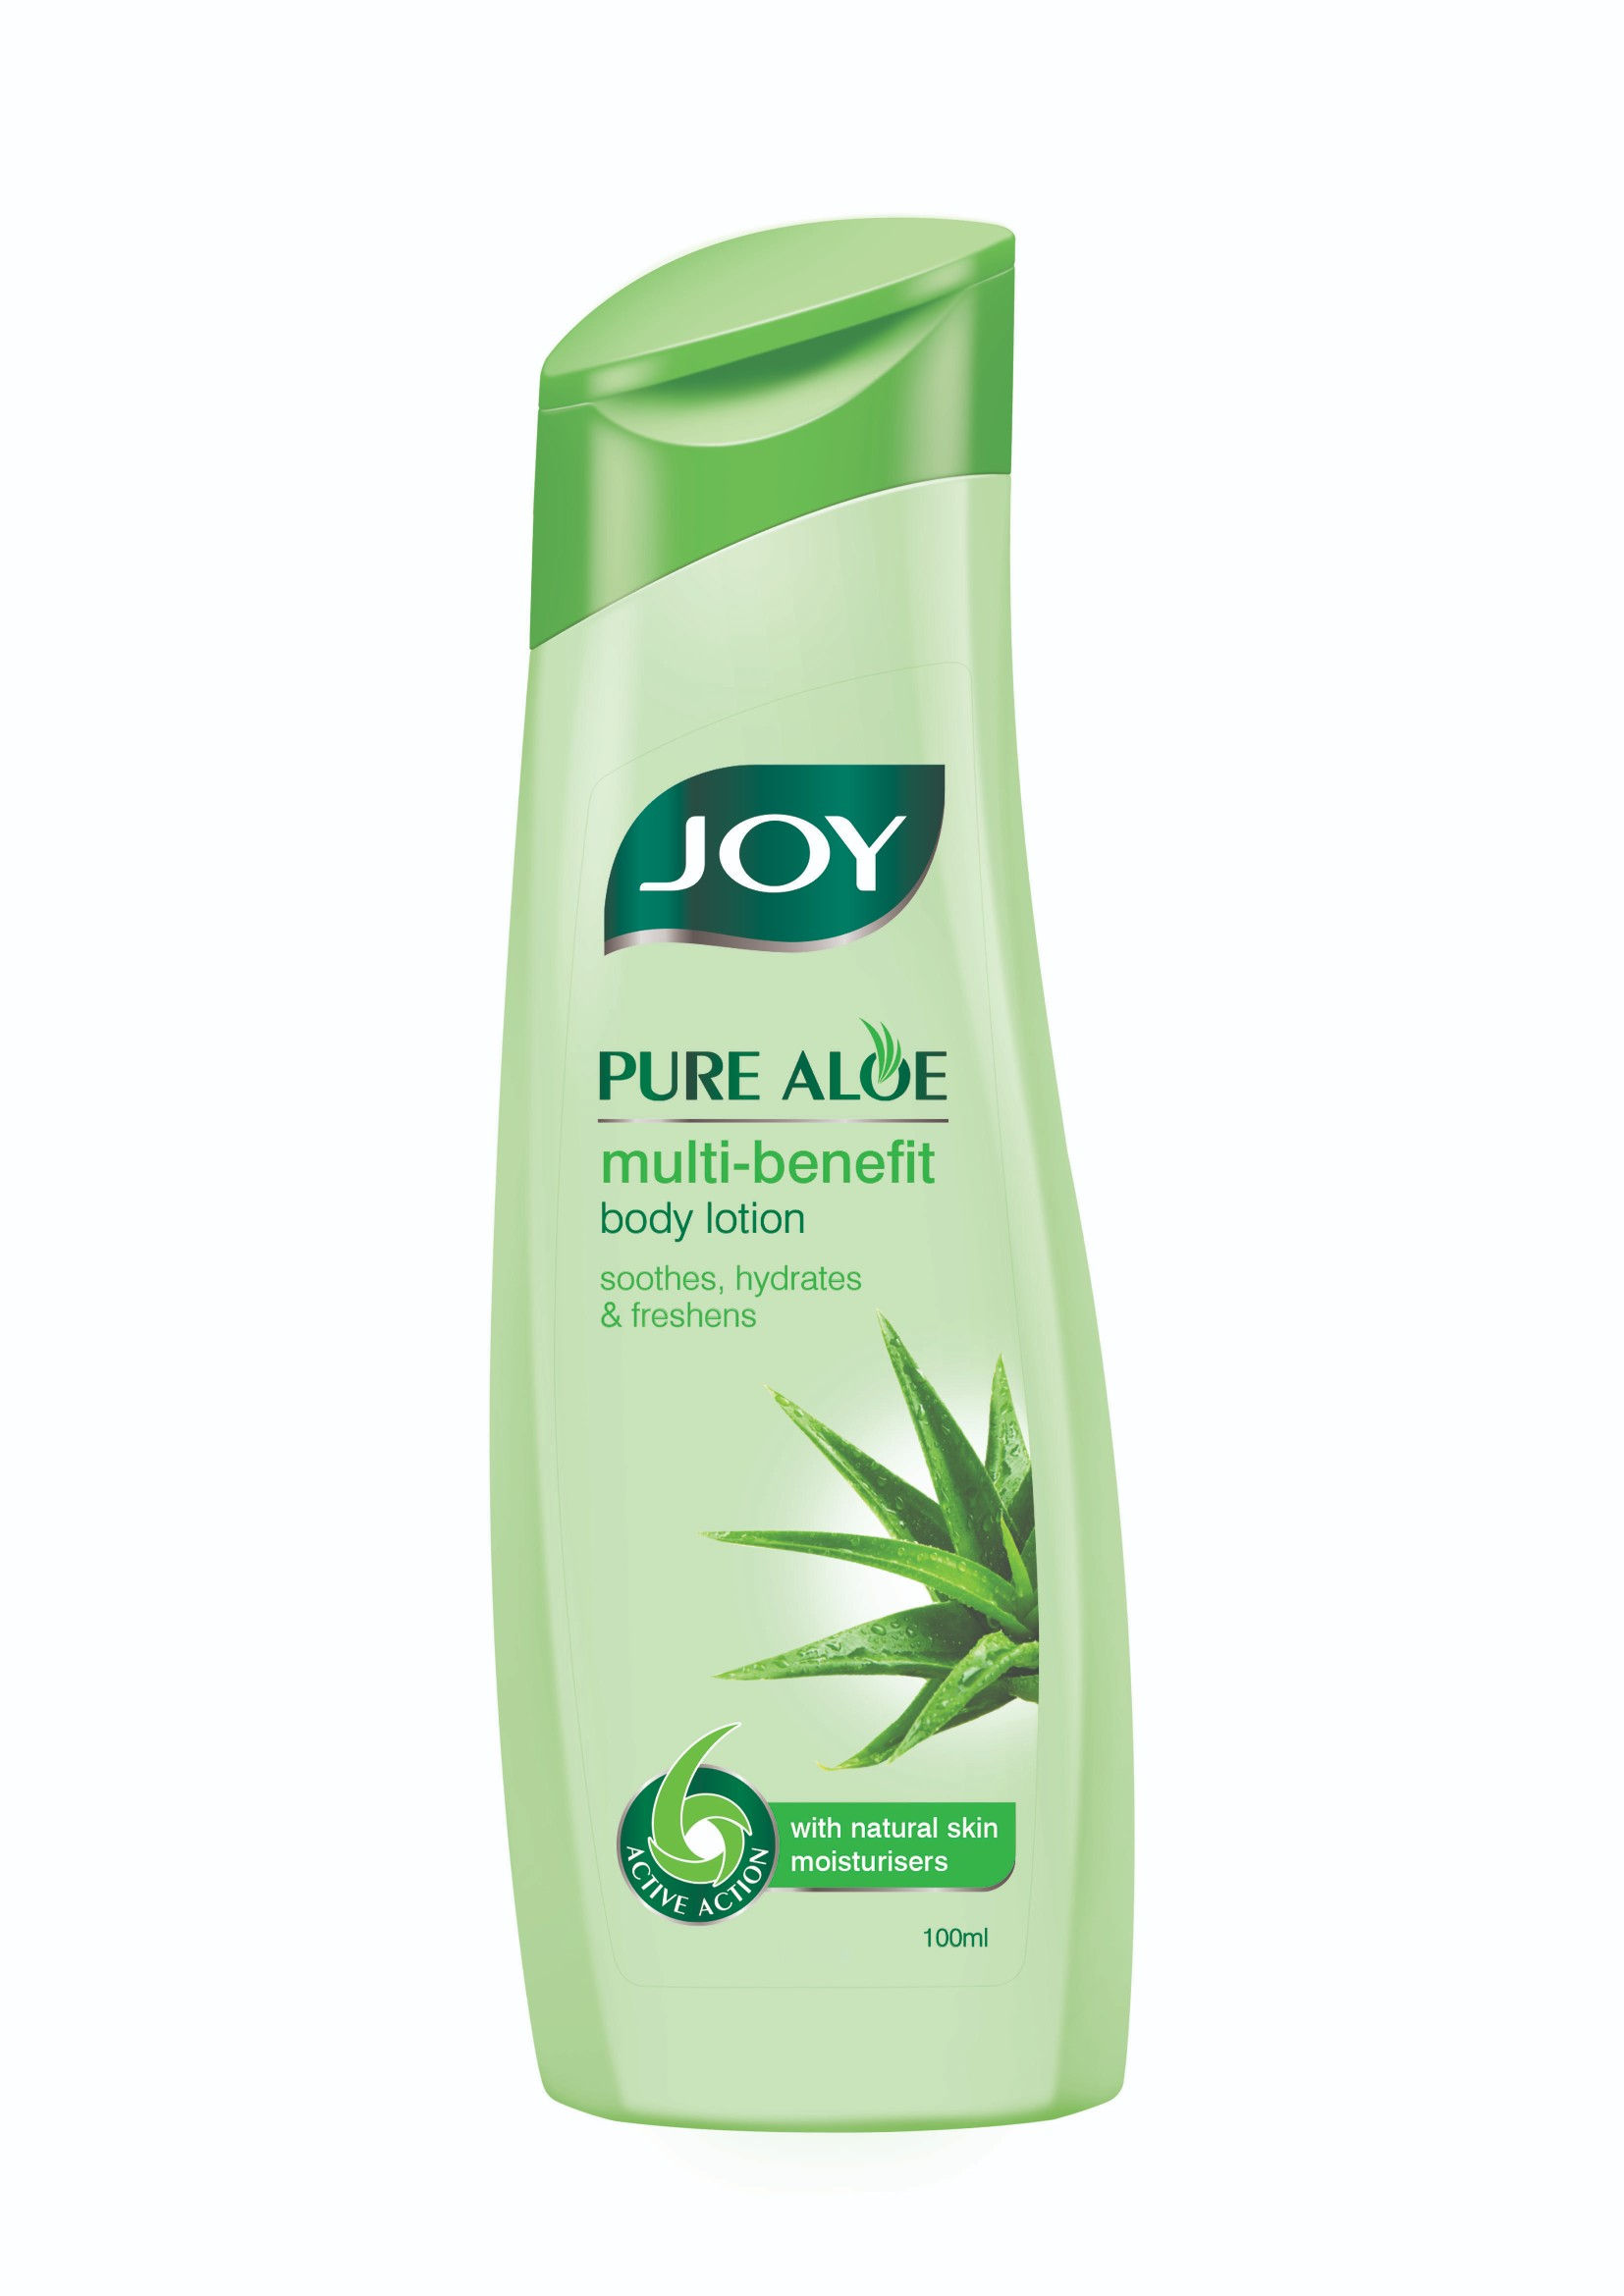 Joy Pure Aloe Multi Benefit Body Lotion 100ml Buy Joy Pure Aloe Multi Benefit Body Lotion 100ml Online At Best Price In India Nykaa